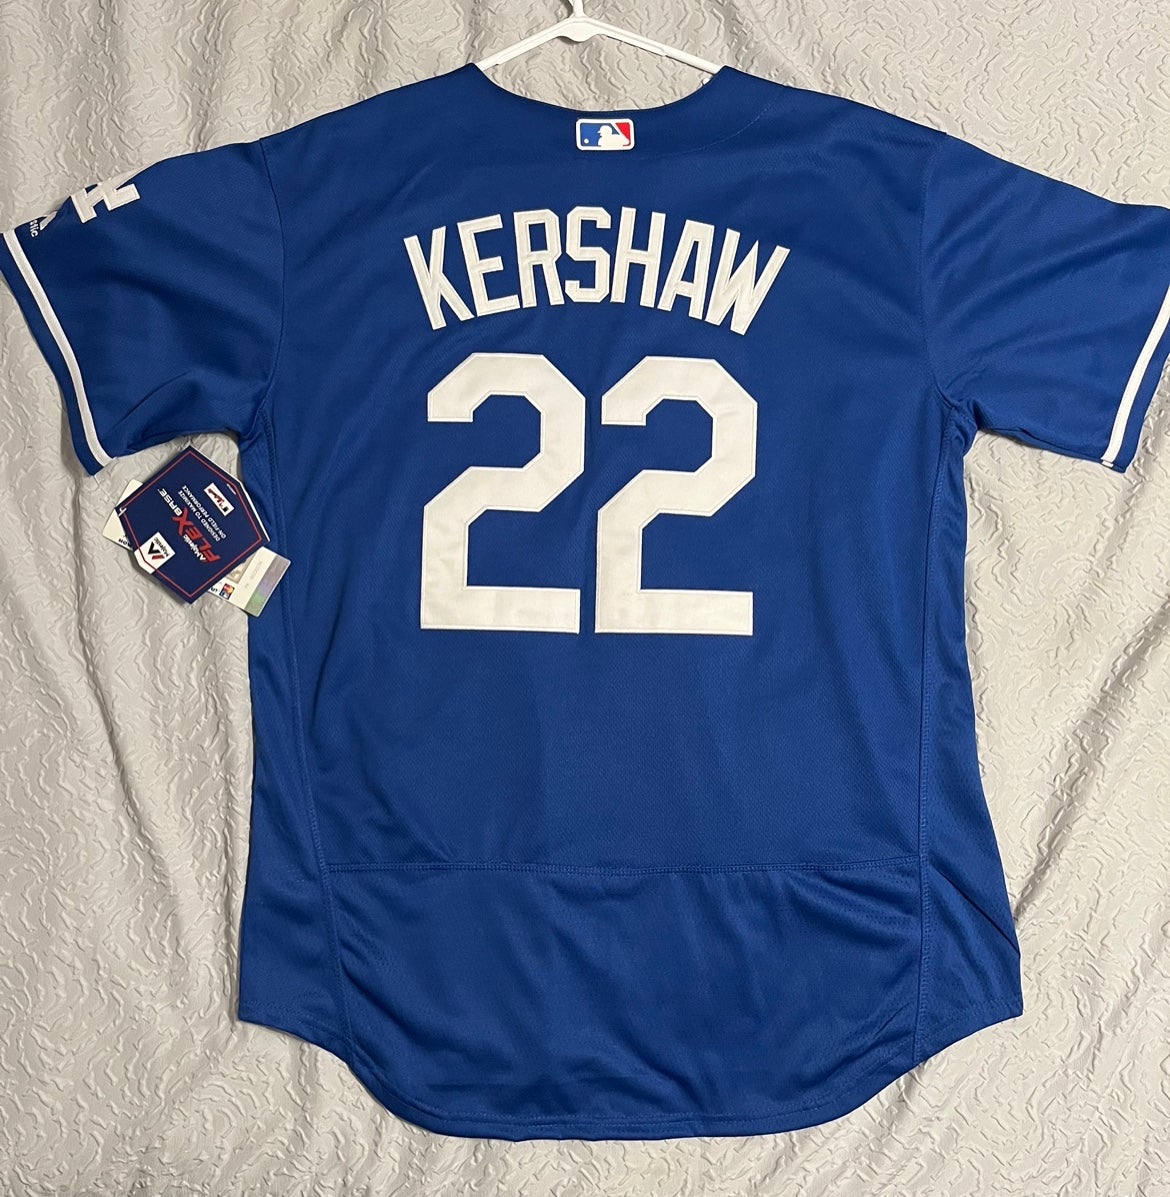 Corey Seager Game-Used Jersey from the 9/25/20 Game vs. LAA - Size